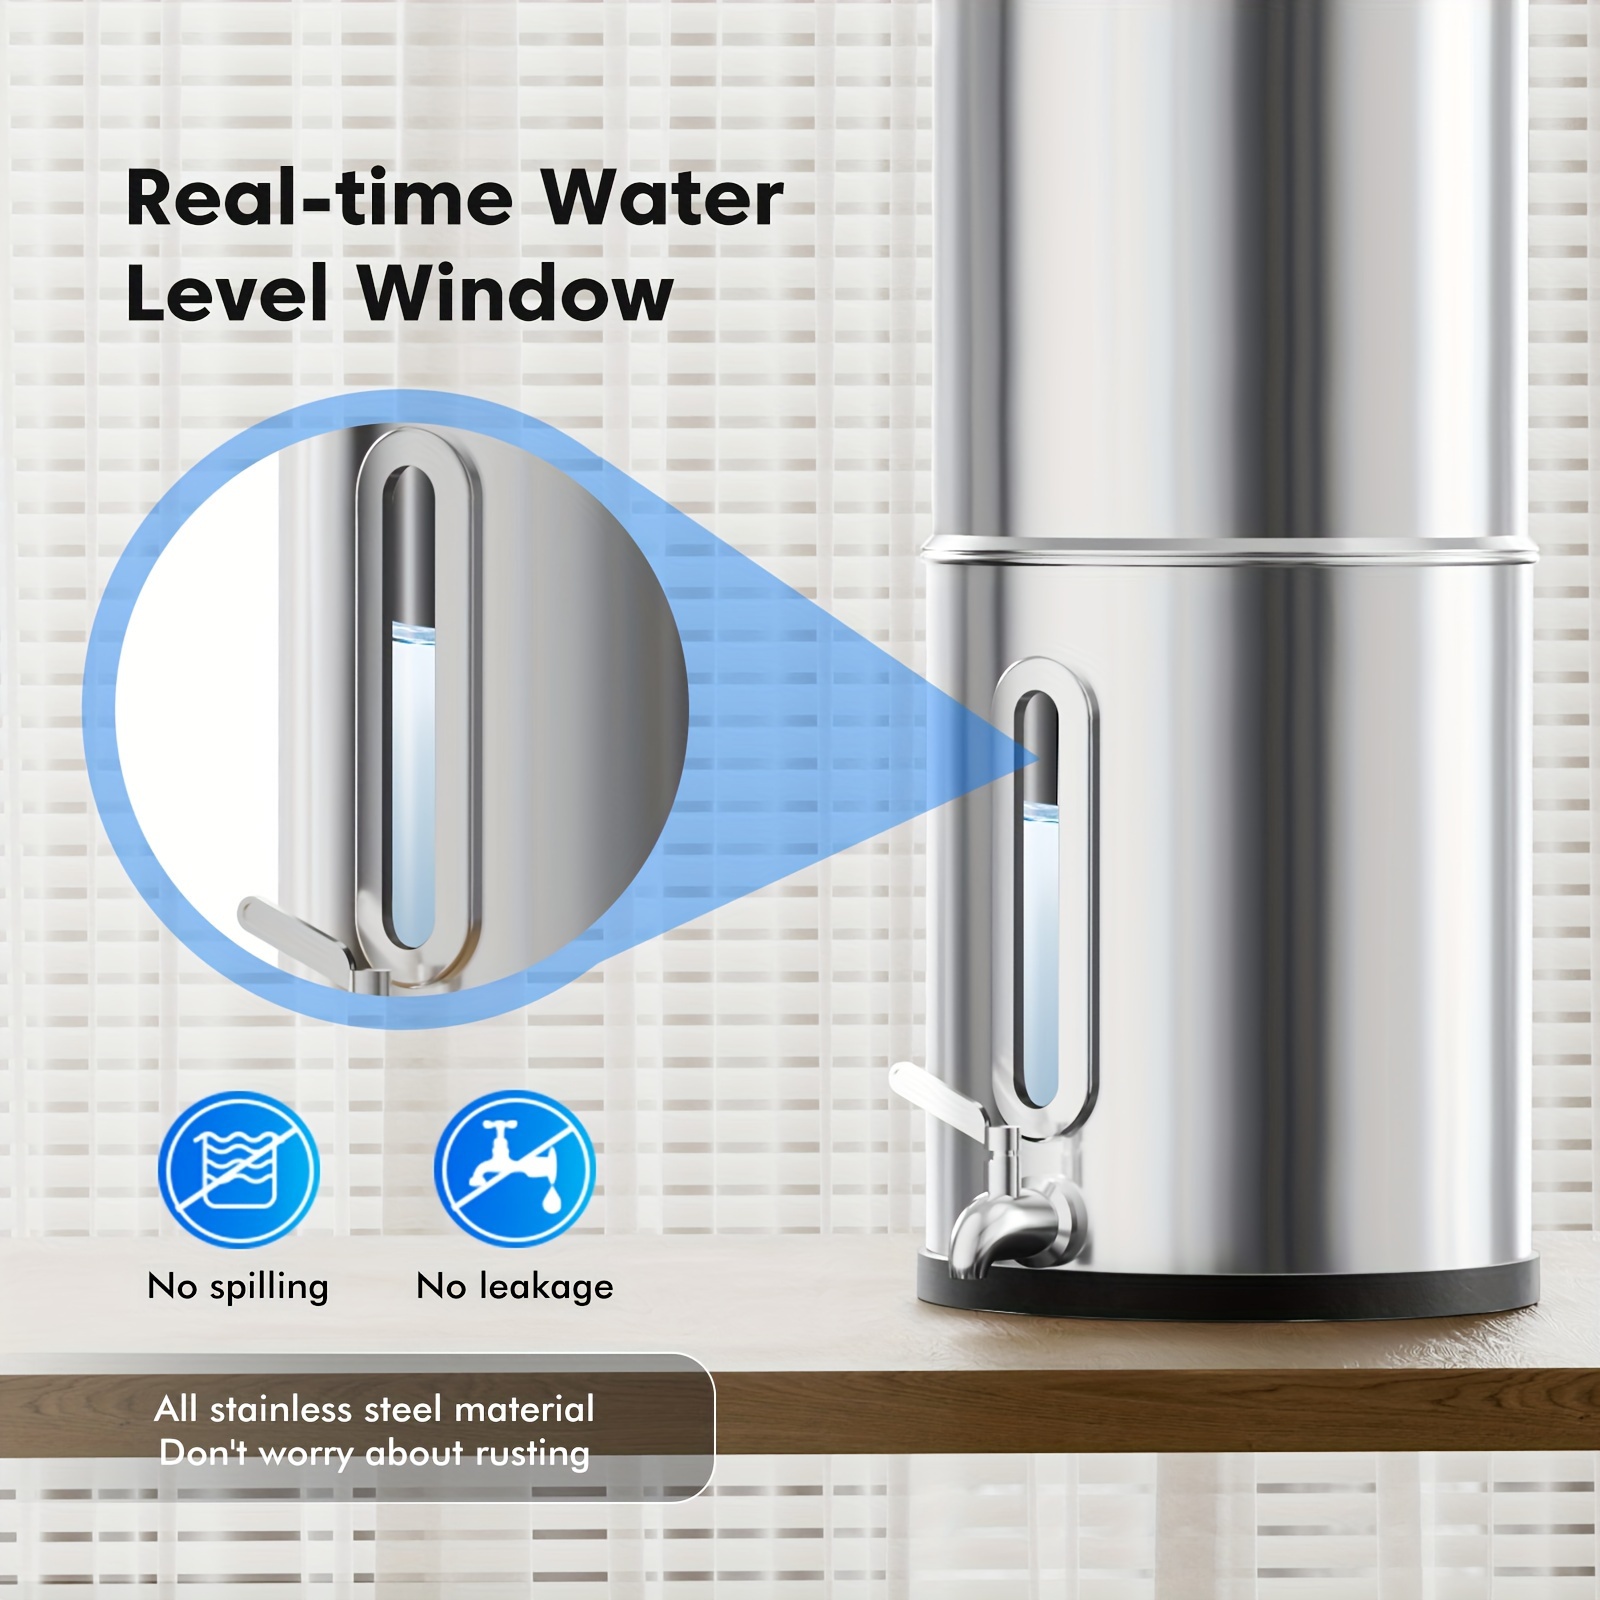 

Home Kitchen Table Detachable Gravity Bucket Water Purifier Water Filter Removes Chlorine Impurities And Other Substances